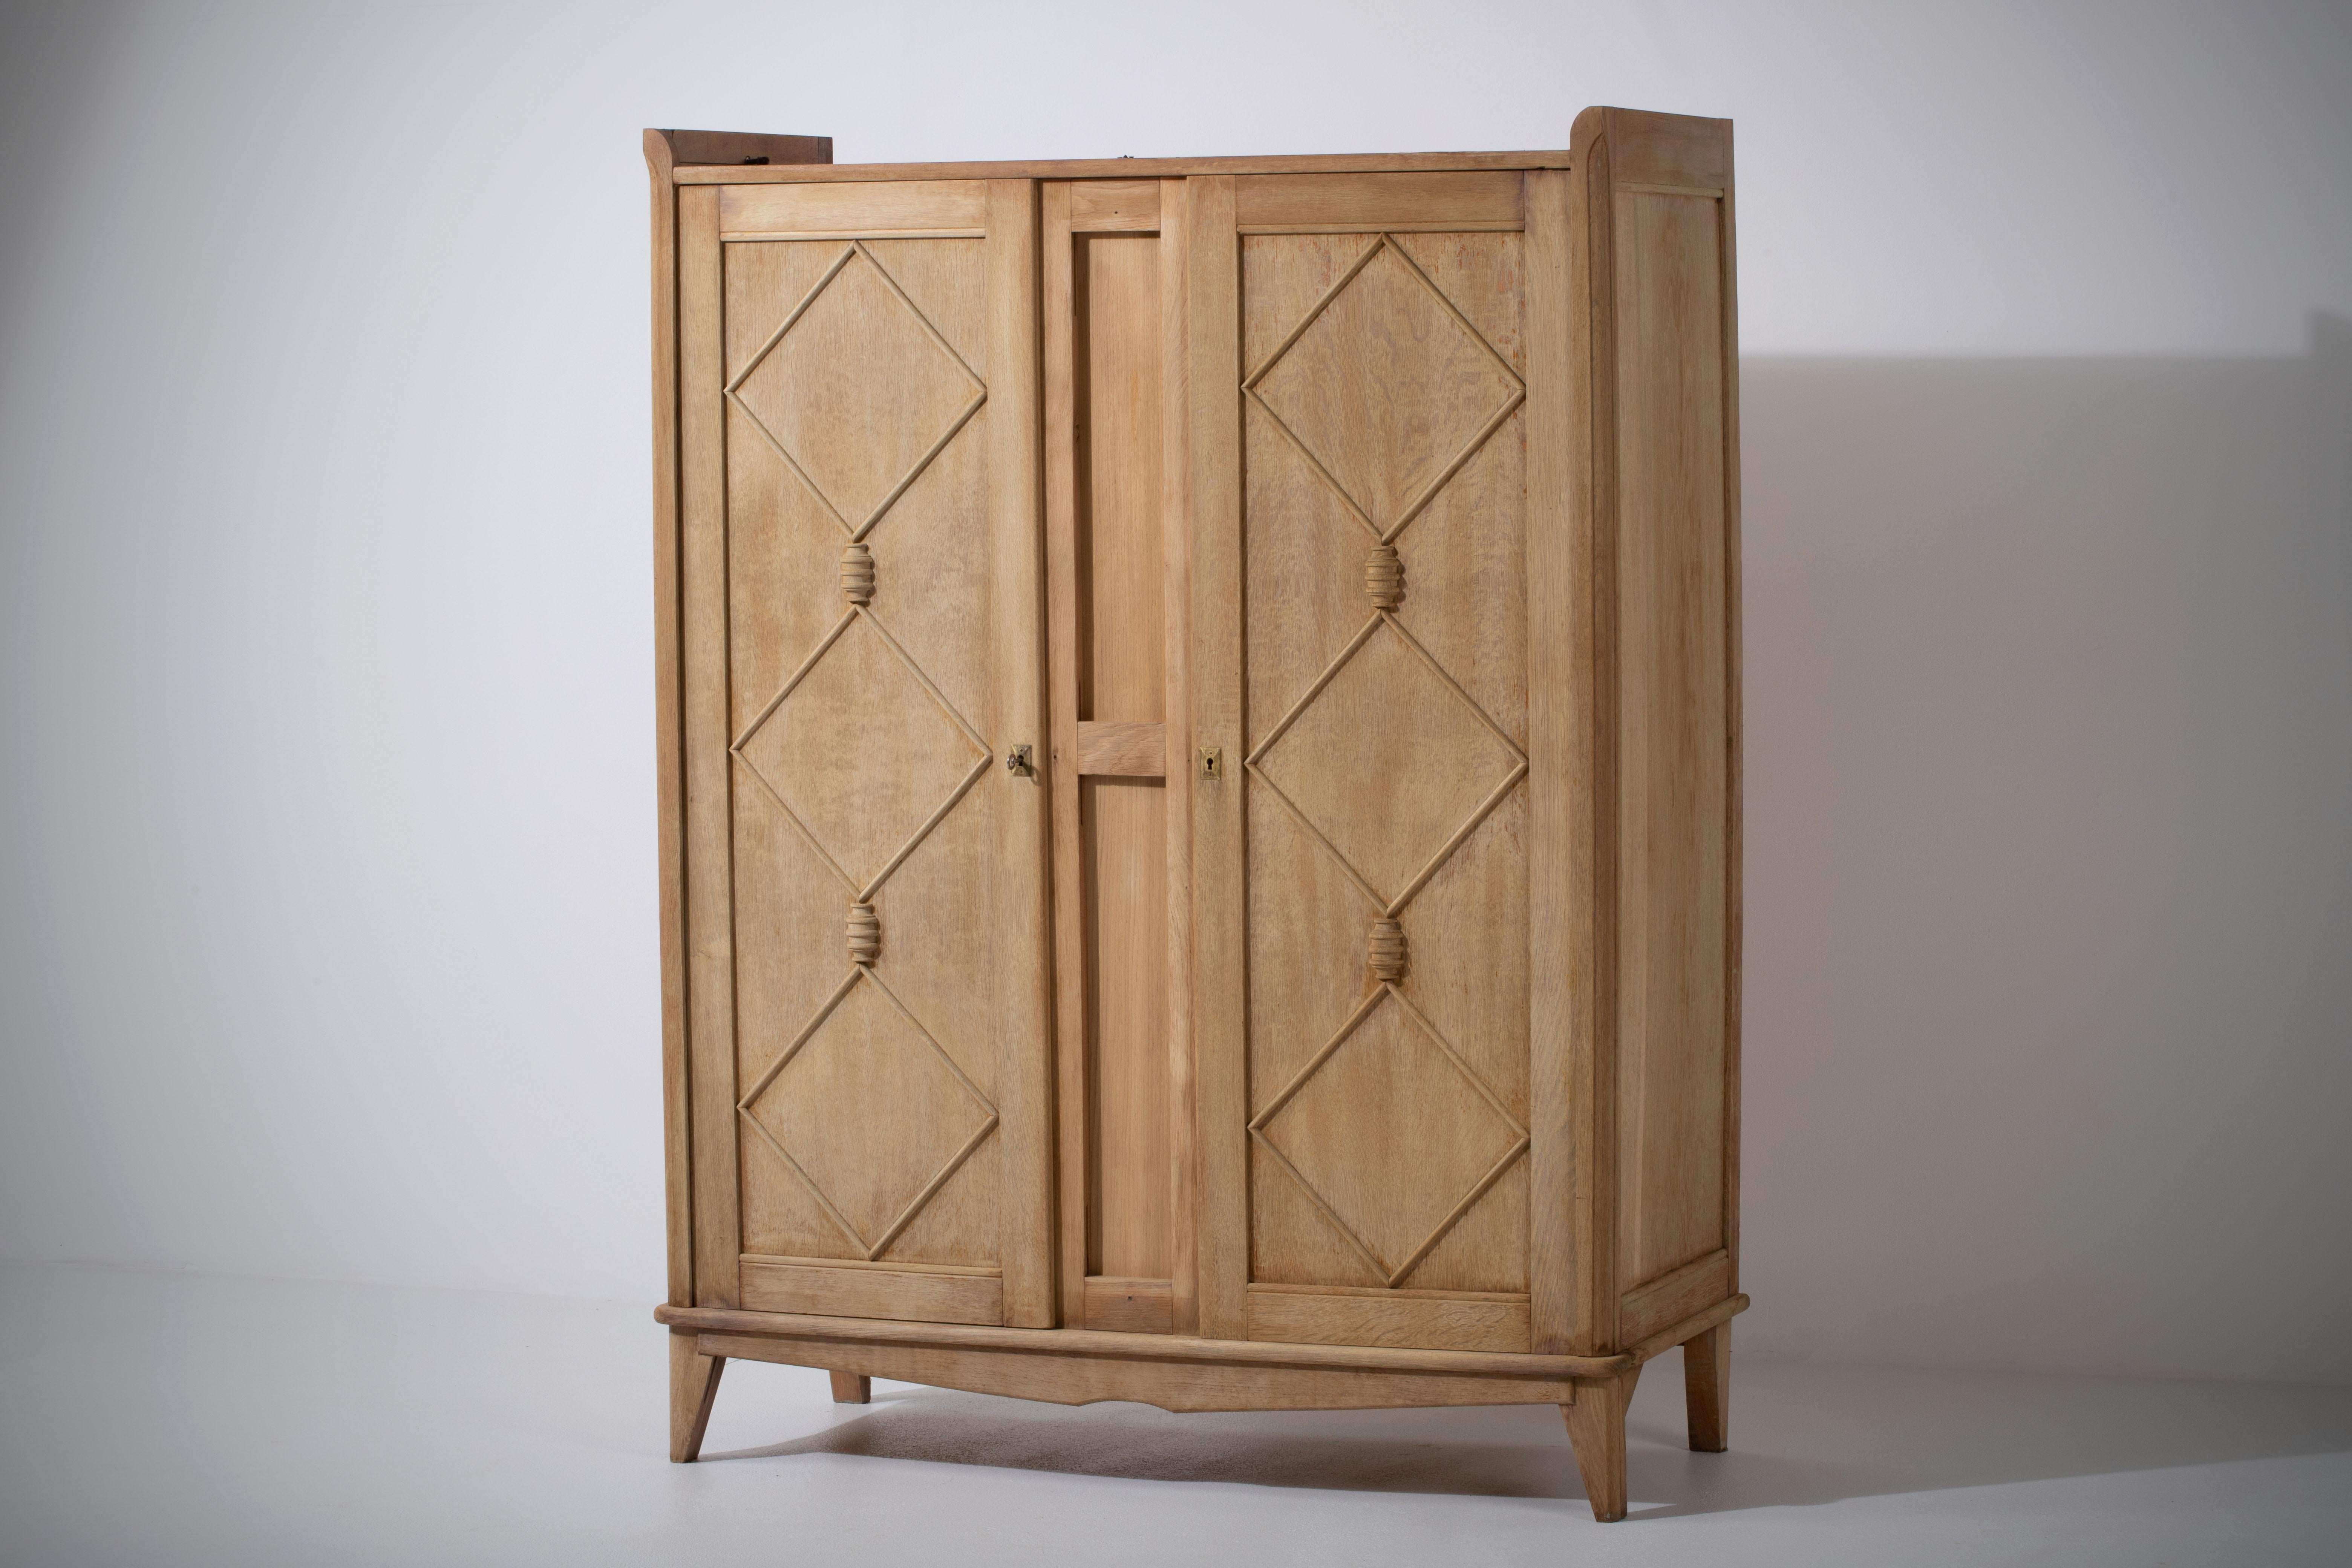 Midcentury French Croisillon-Patterned Natural Oak Armoire 2